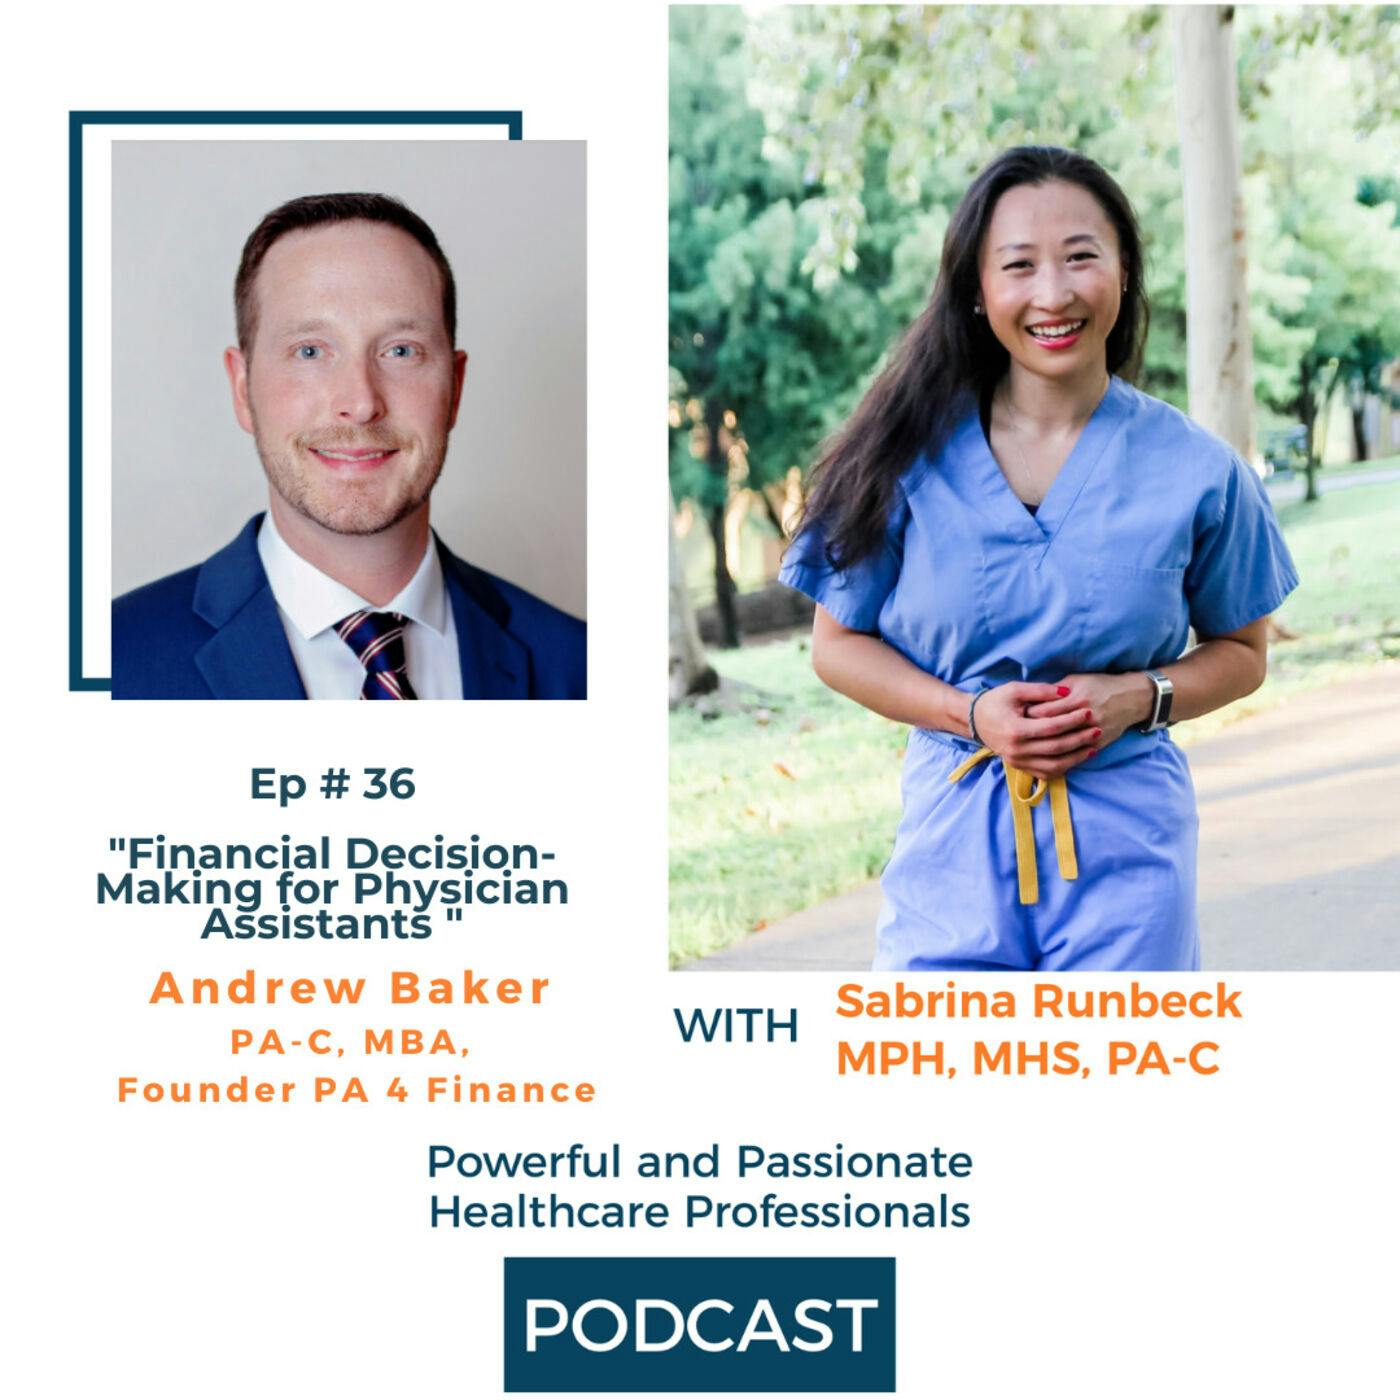 Ep 36 – Financial Decision-Making for Physician Assistants with Andrew Baker